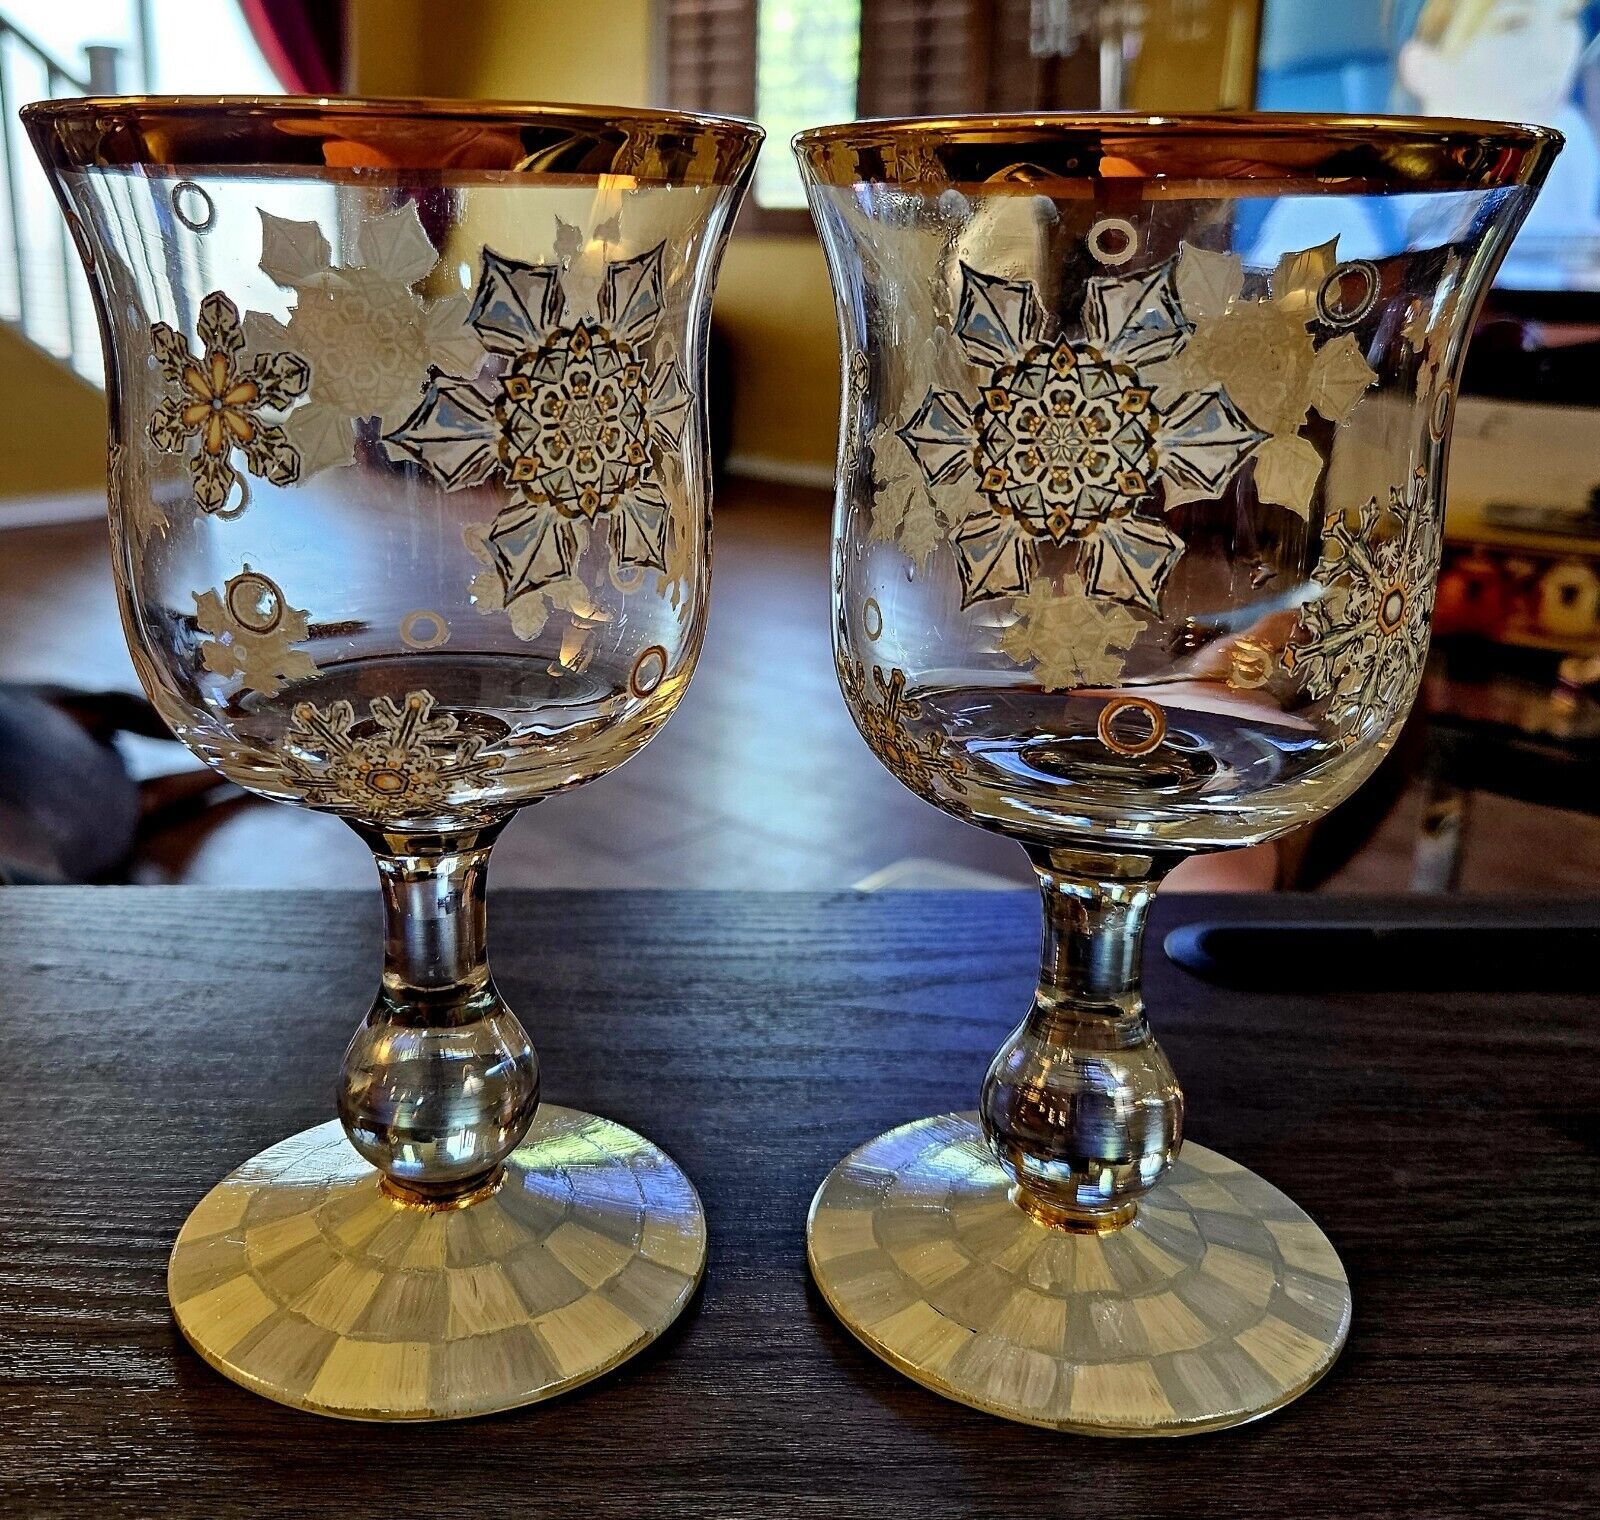 ❄️Pair of MacKenzie-Childs SNOWFALL Wine Glasses SOLD OUT HOLIDAY Snowflakes❄️